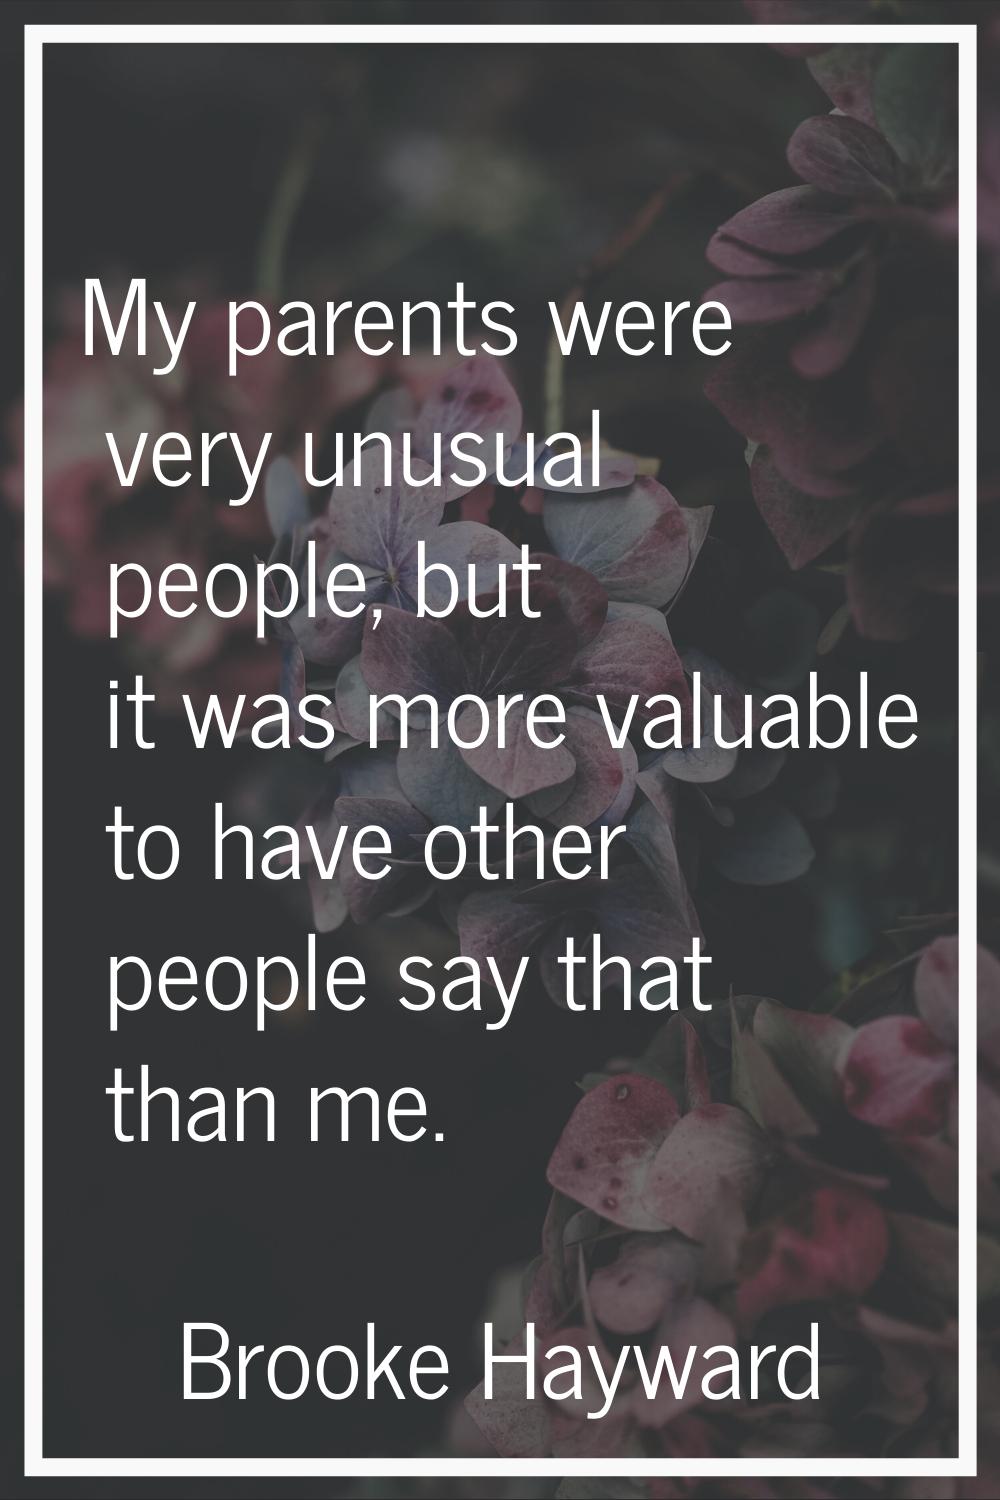 My parents were very unusual people, but it was more valuable to have other people say that than me